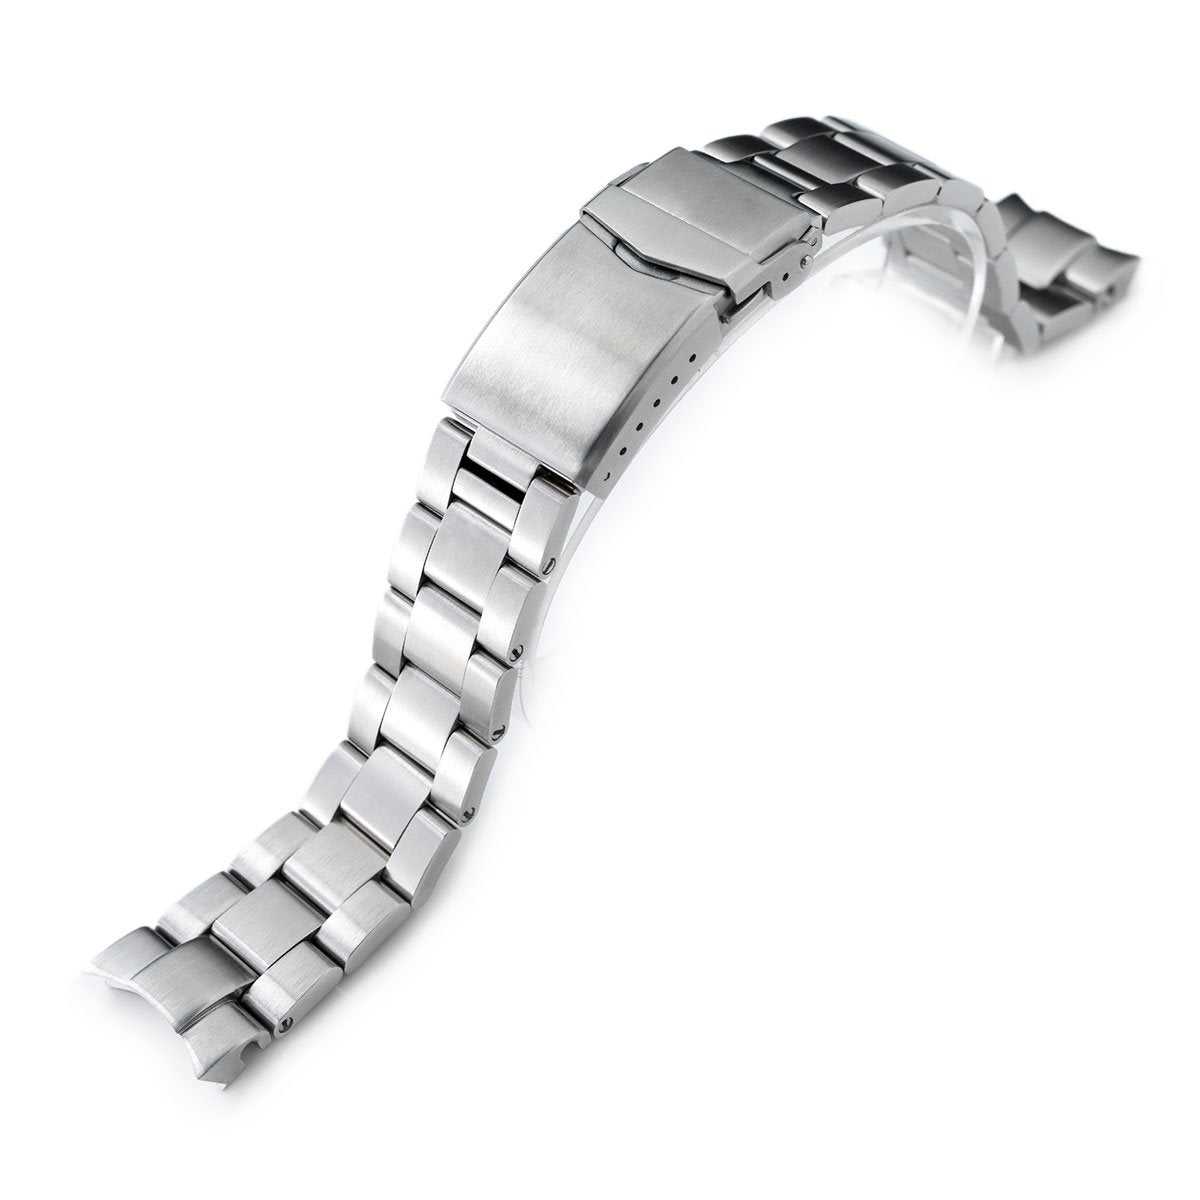 20mm Super-O Boyer watch band for Seiko Alpinist SARB017 (or Hamilton K.) Brushed V-Clasp Button Double Lock Strapcode Watch Bands